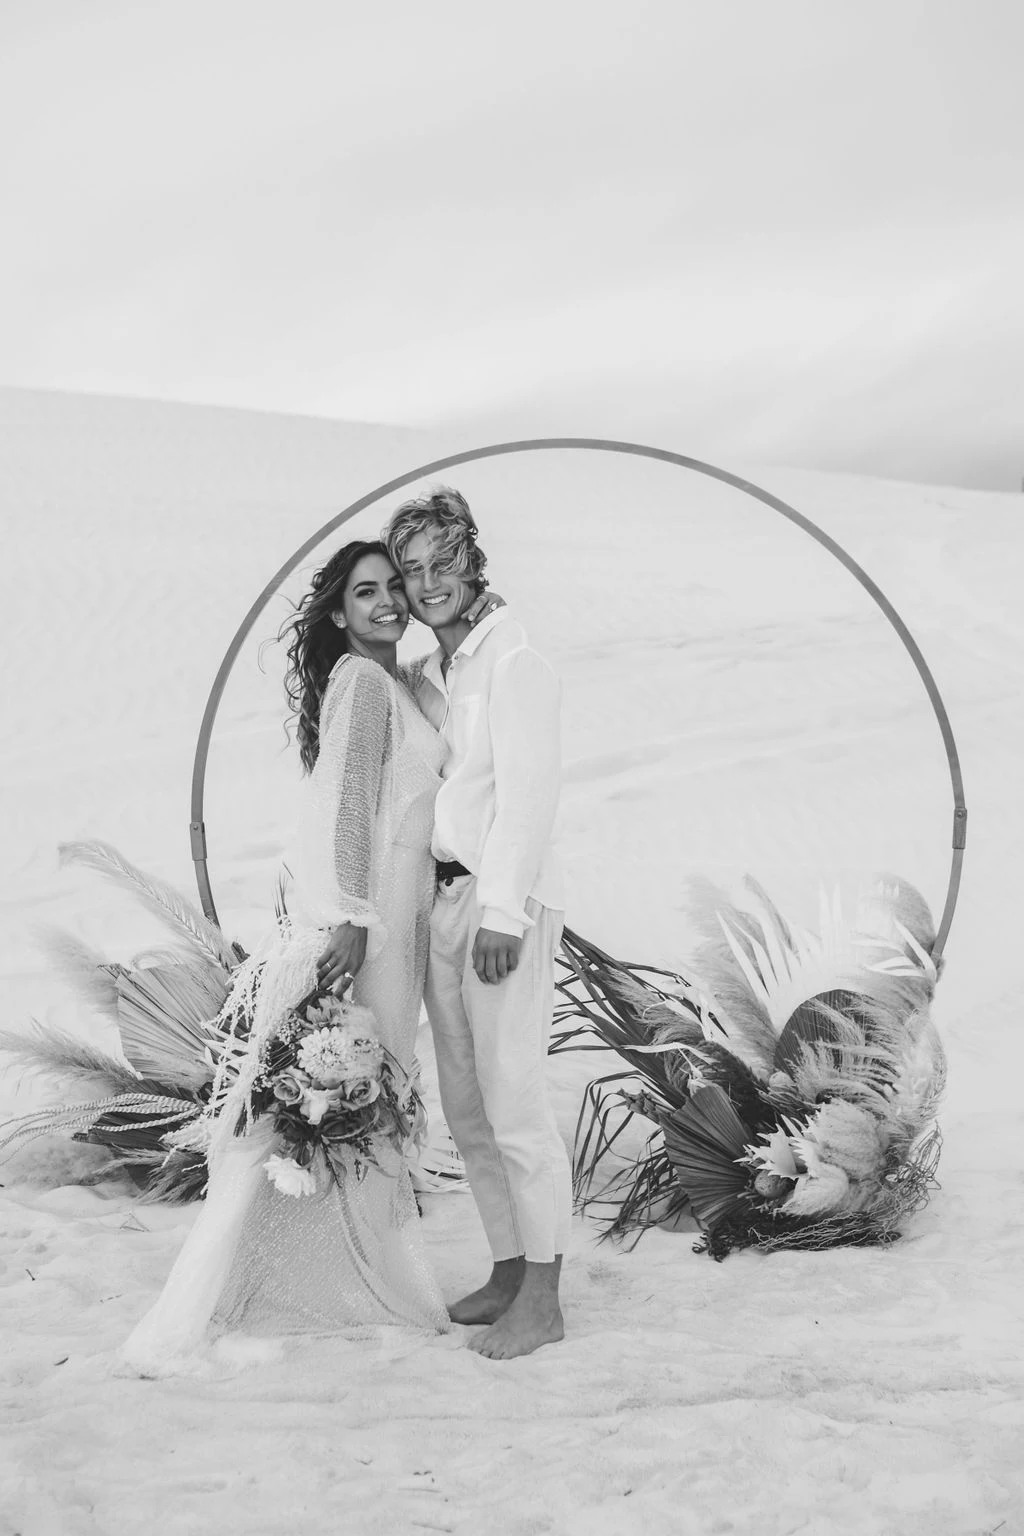 Jypsea photography perth weddings sand dunes elopement bridal gowns hair makeup florals styled boho